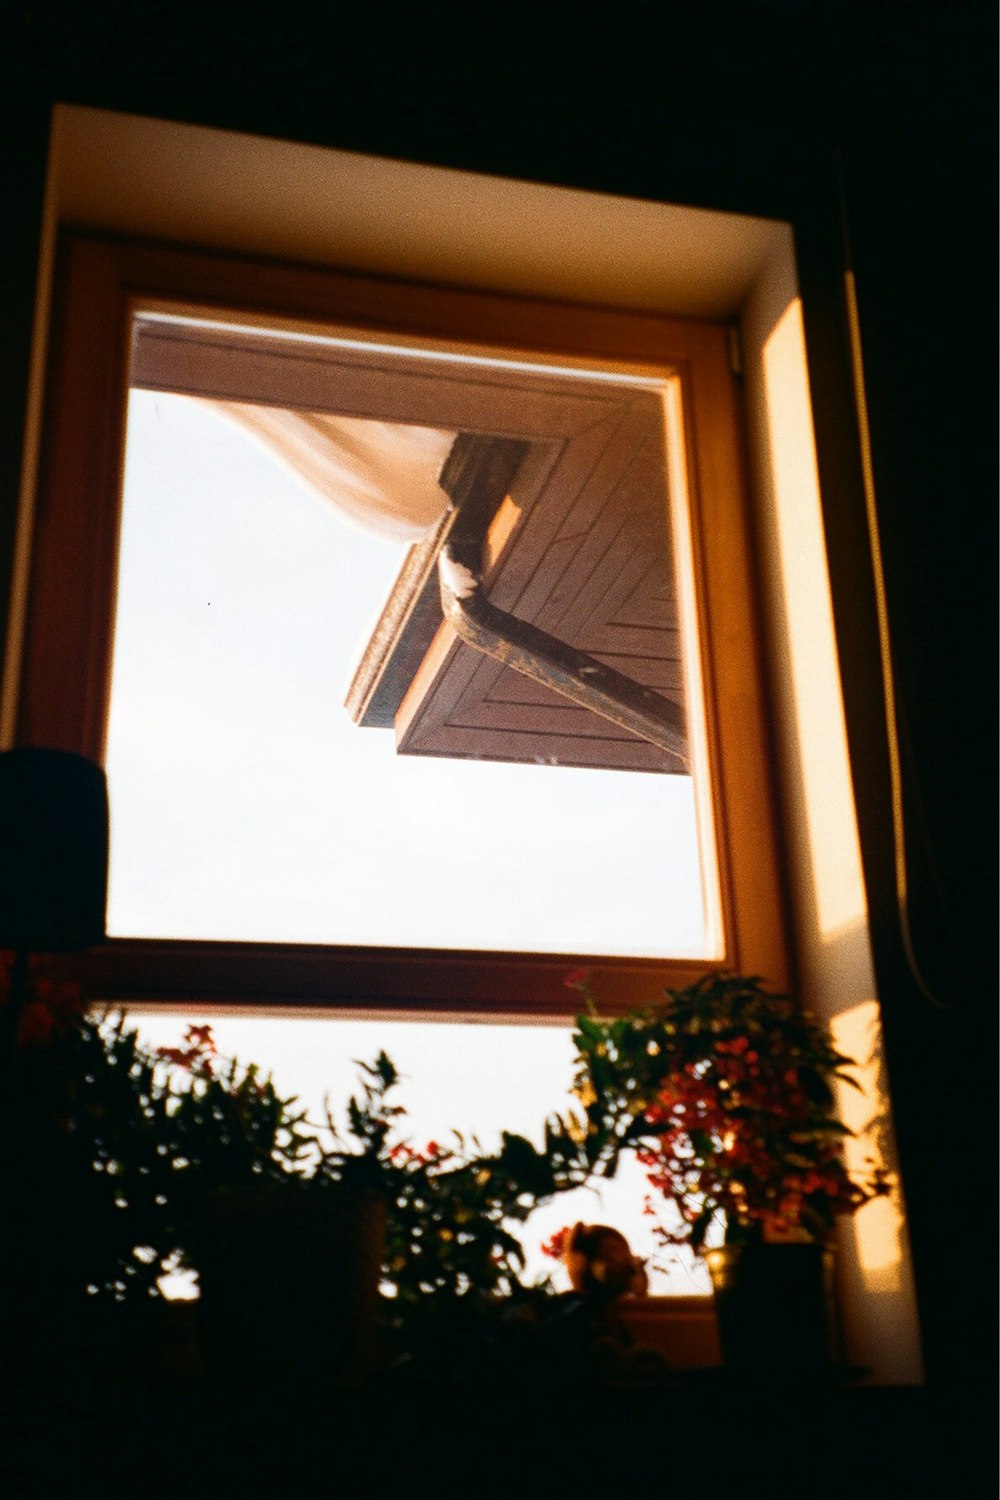 a window with a view of the sky outside